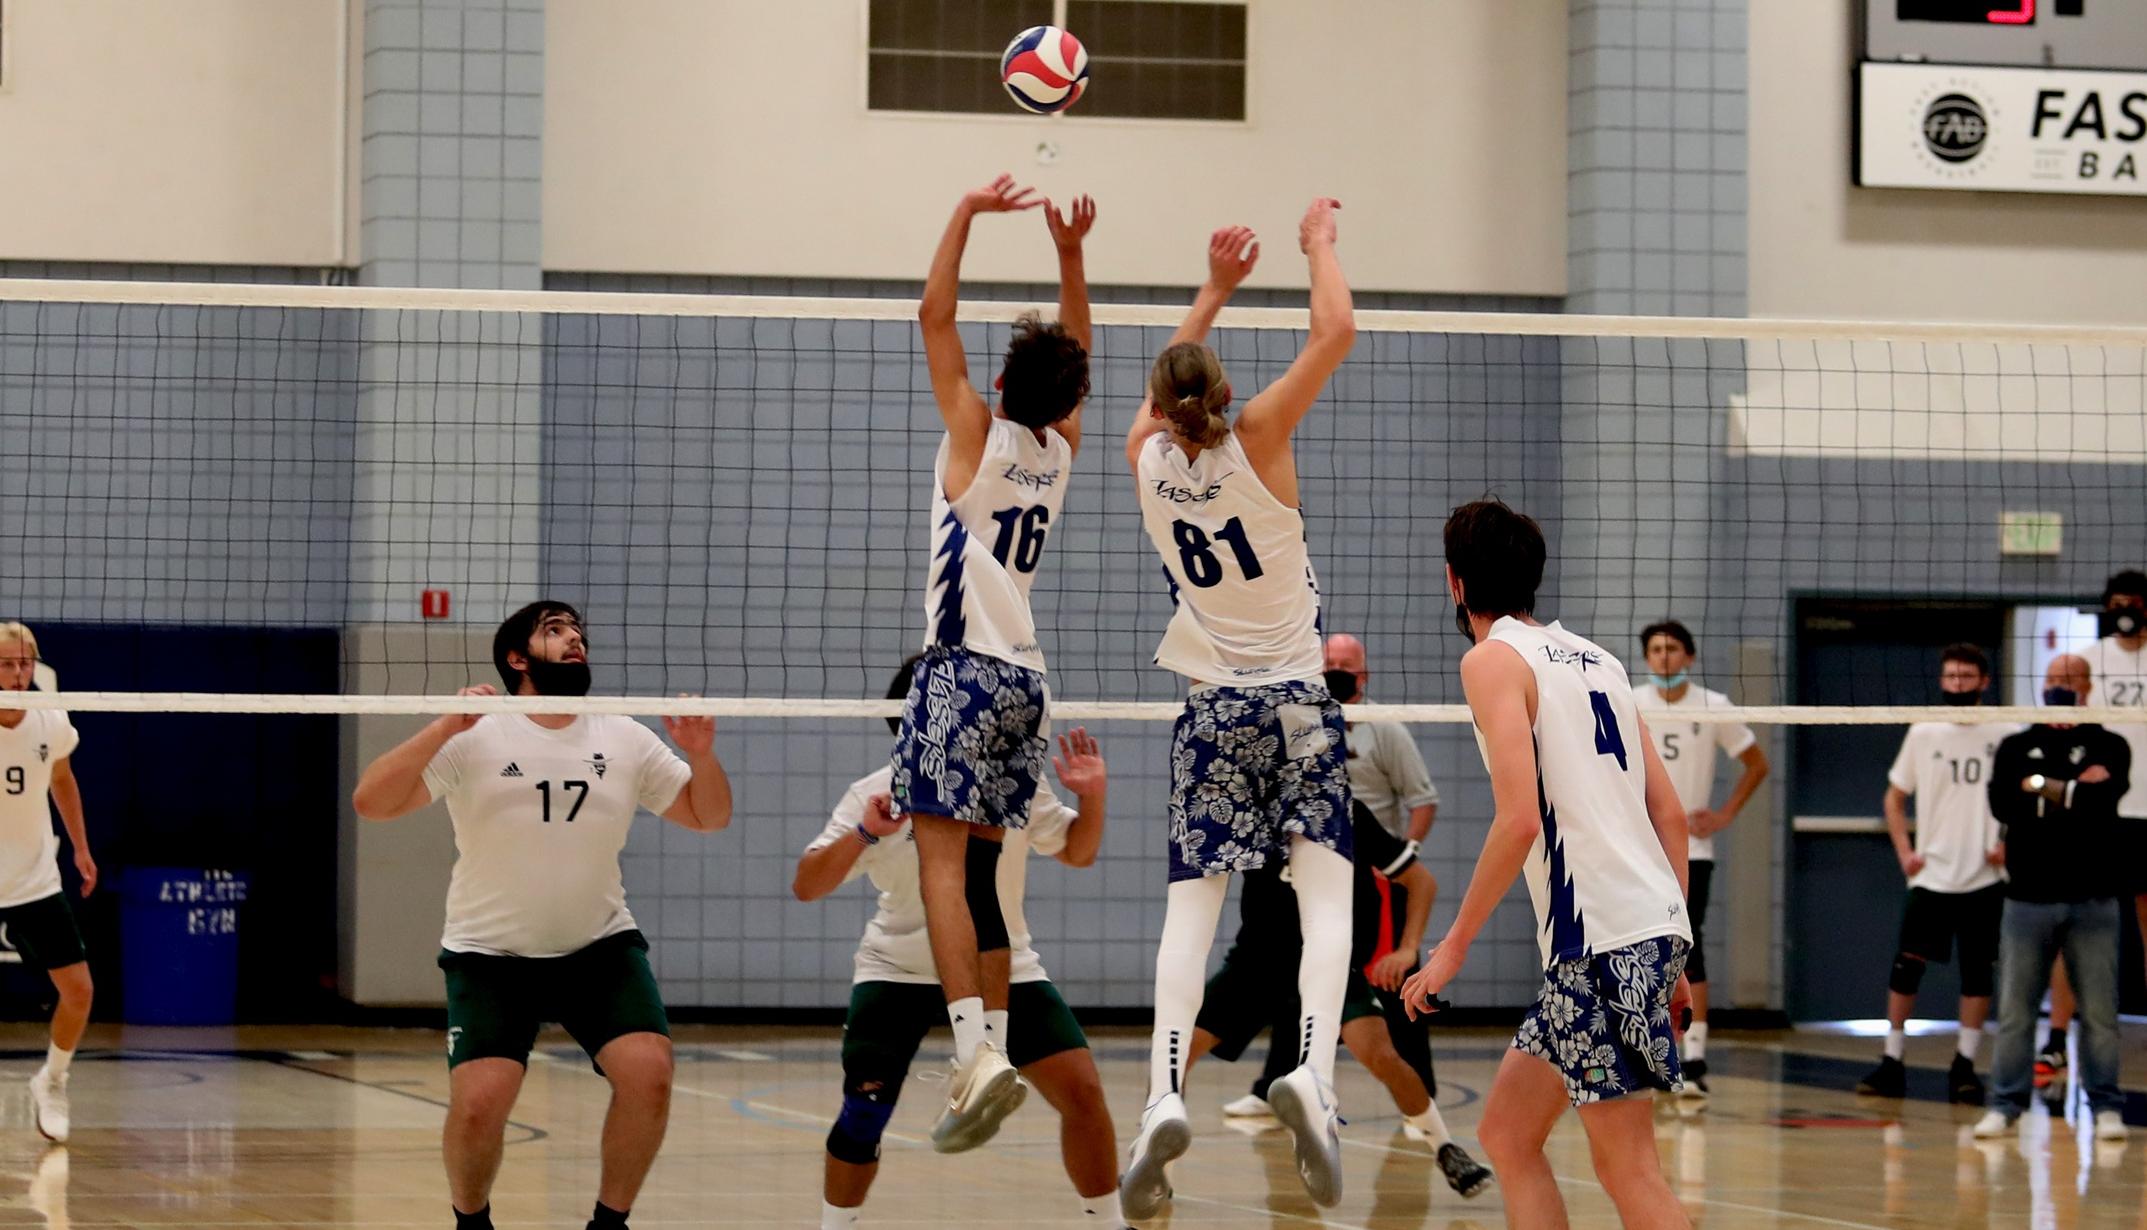 Men's volleyball team stays perfect with sweep of Golden West